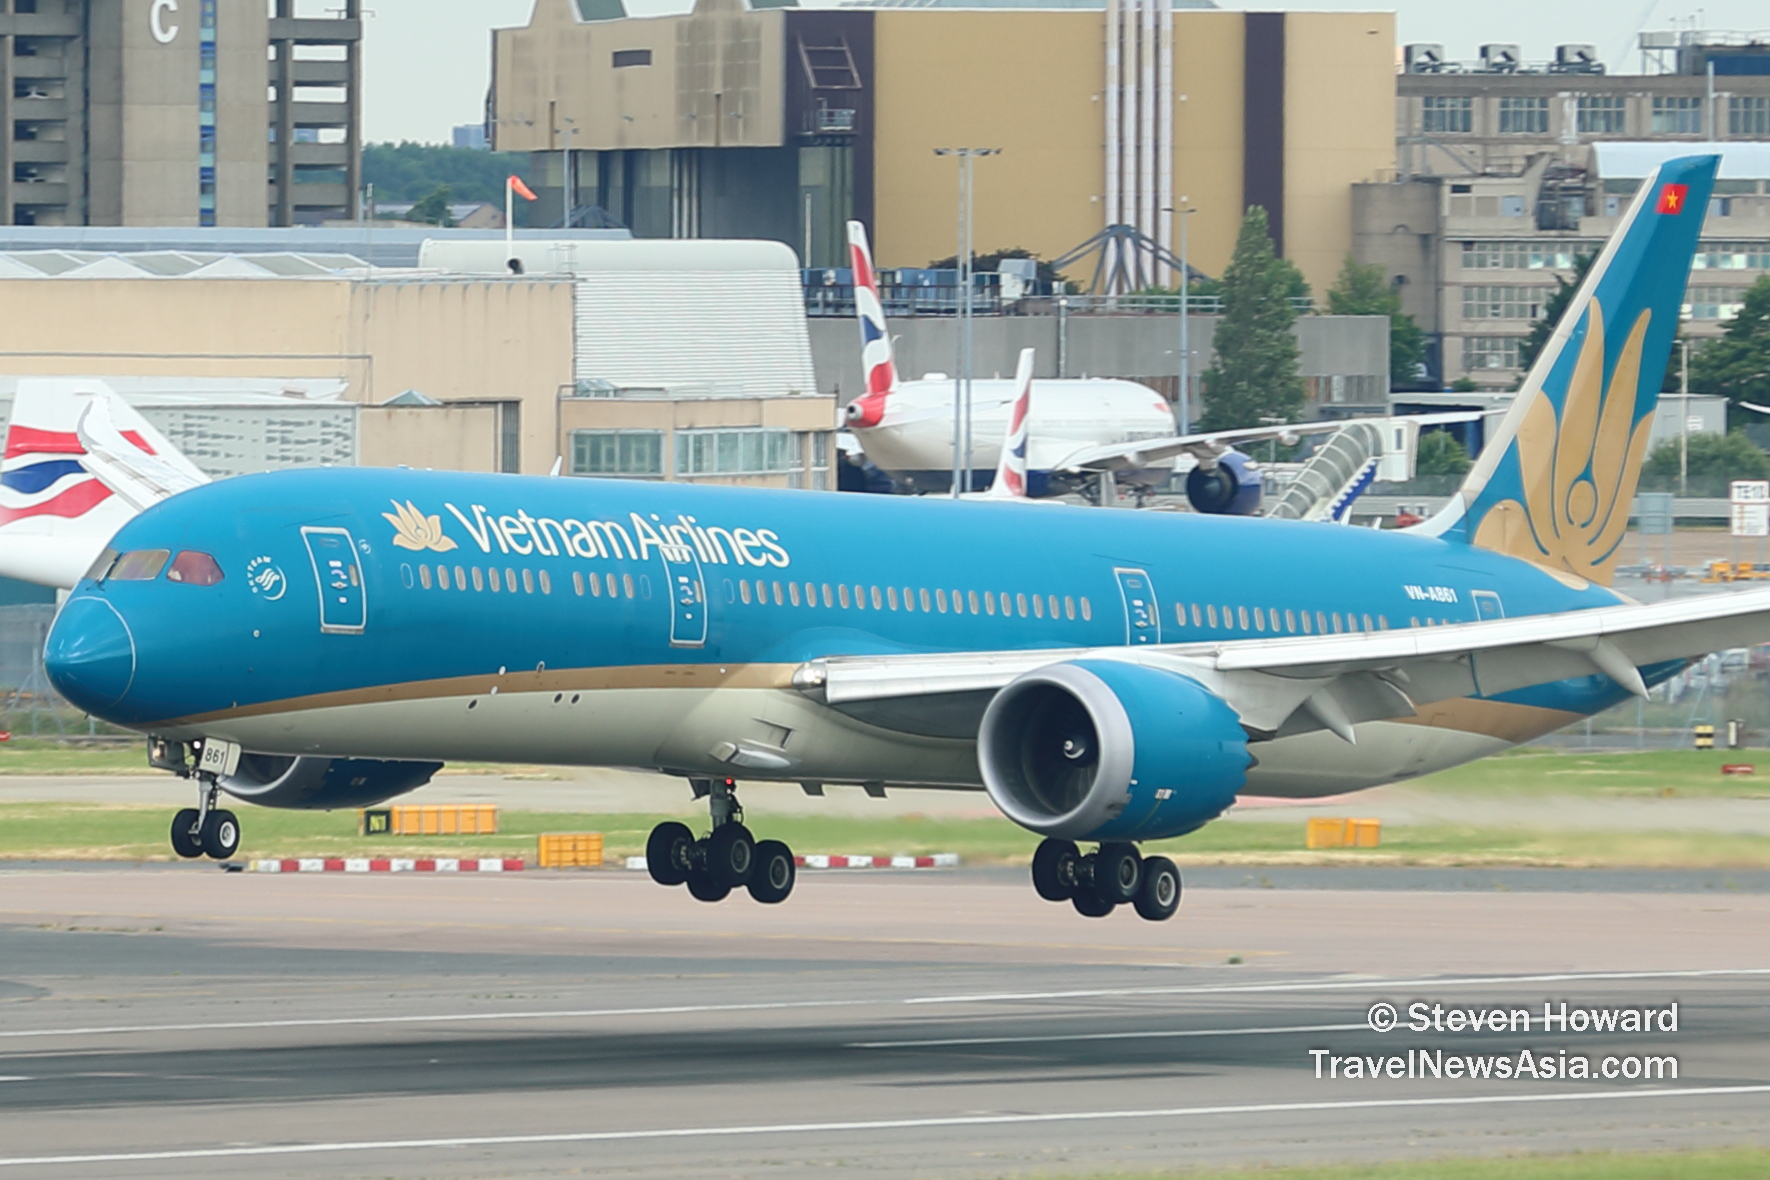 Vietnam Airlines B787-9 reg: VN-861. Picture by Steven Howard of TravelNewsAsia.com Click to enlarge.